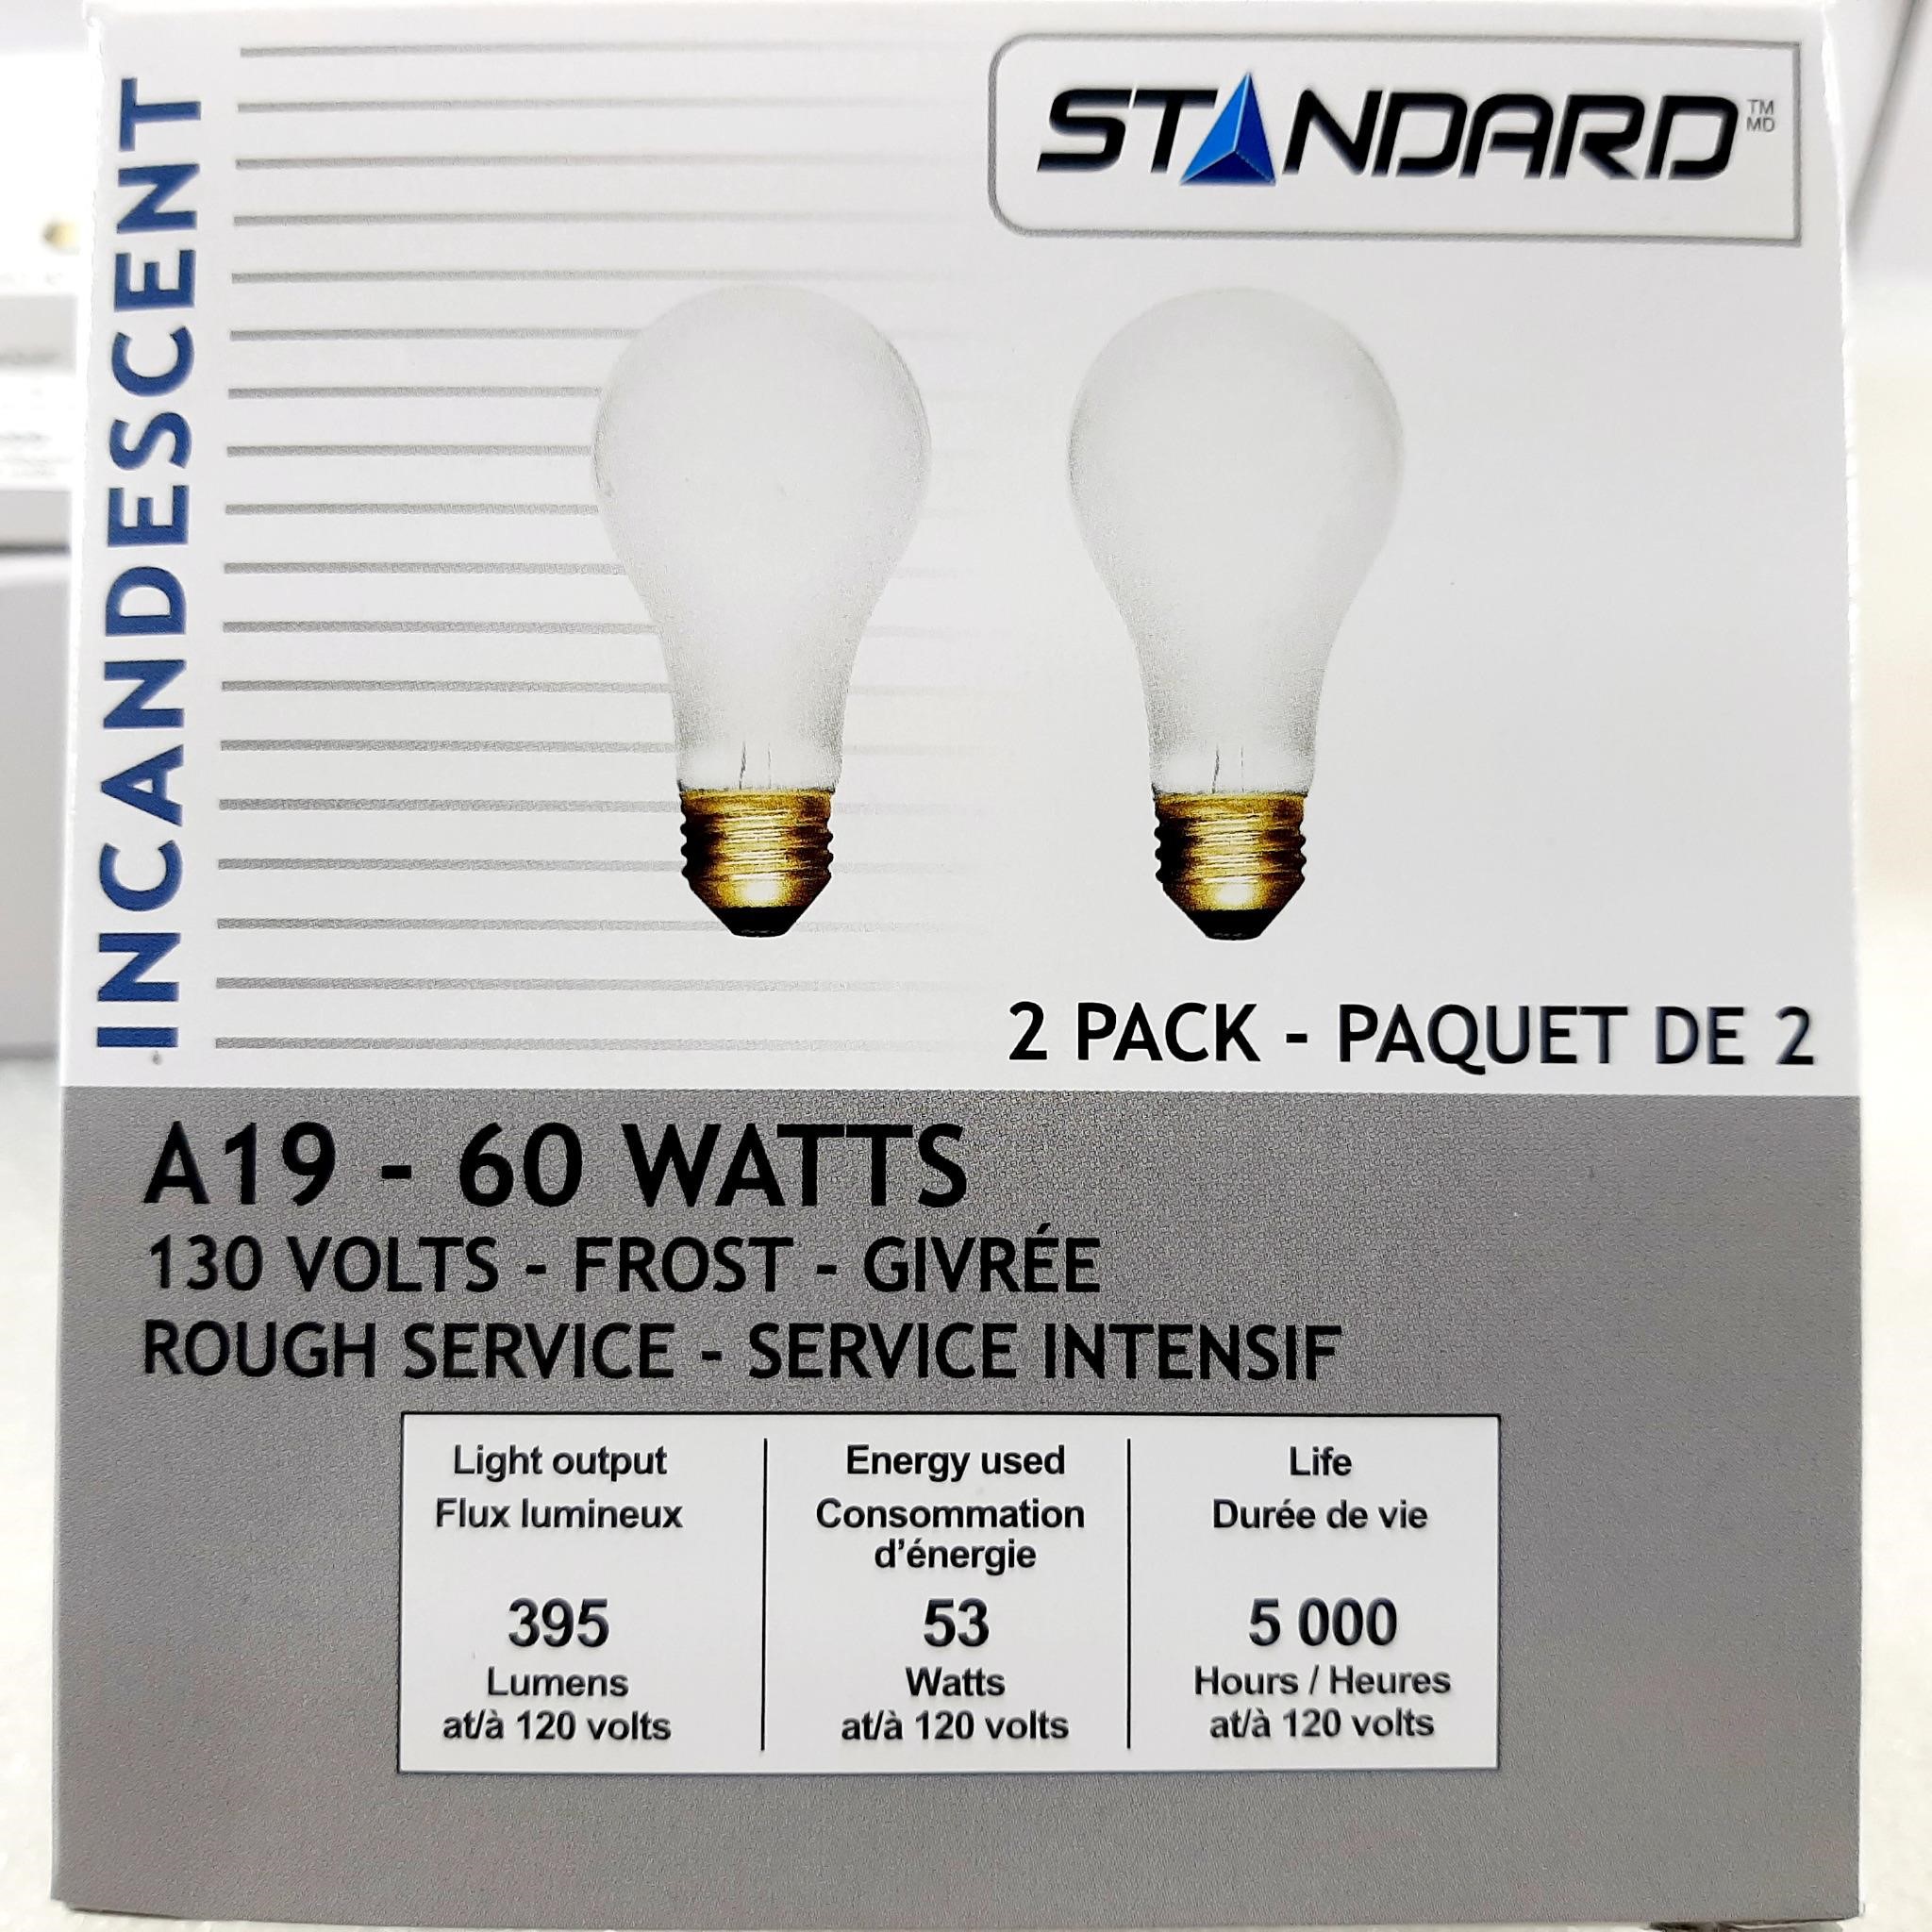 24 ampoules incandescentes 60W STANDARD, neuf